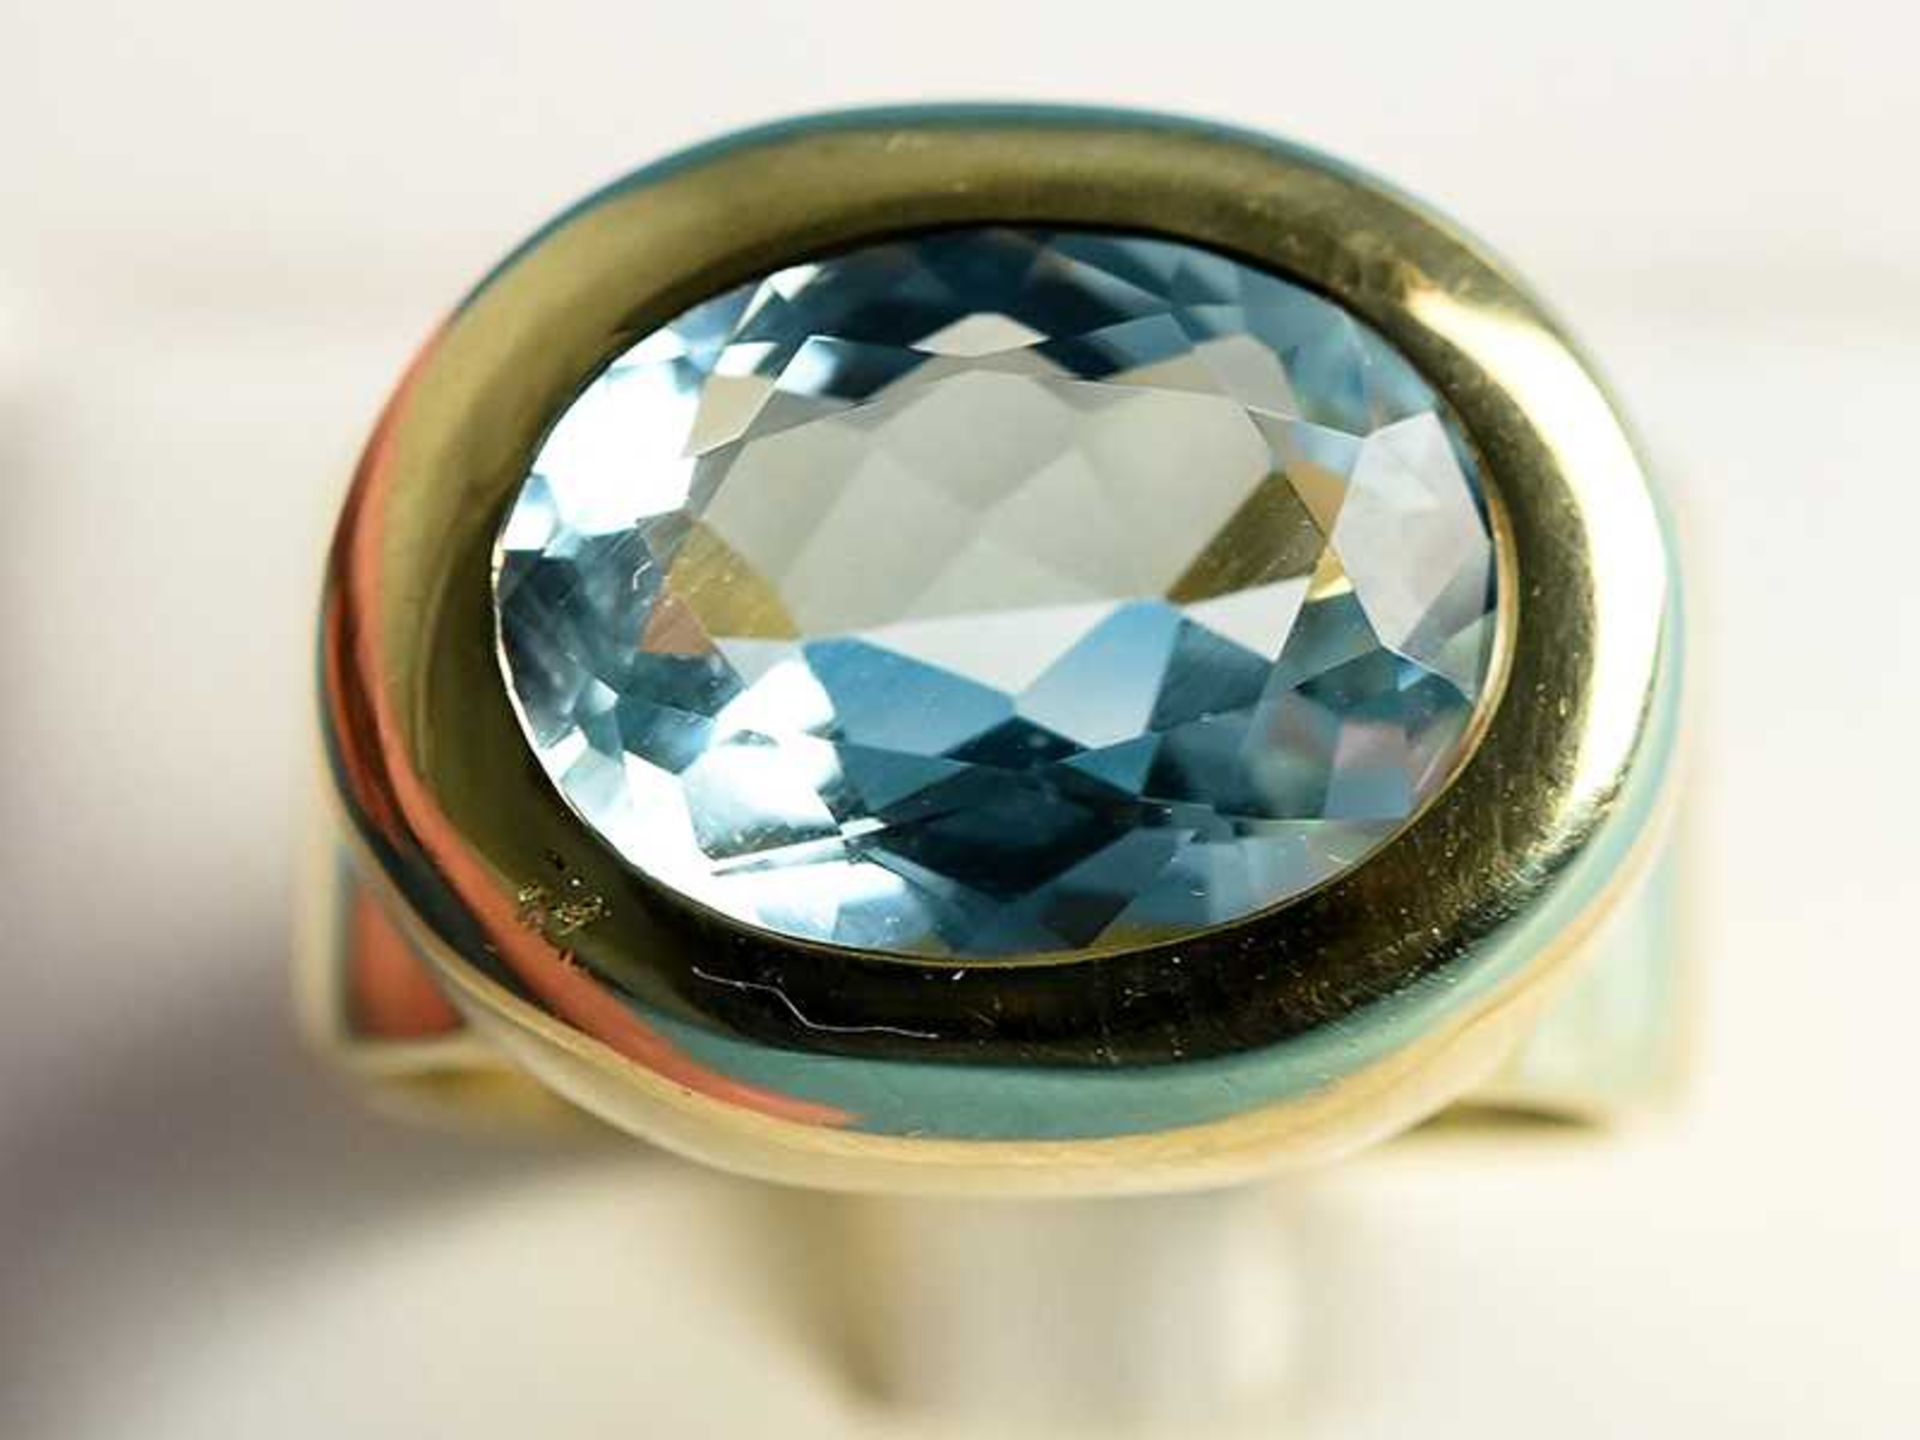 Massiver Bandring mit Aquamarin ca. 5,8 ct, Goldschmiedearbeit, 20. Jh. 585/- Gelbgold. - Image 8 of 10